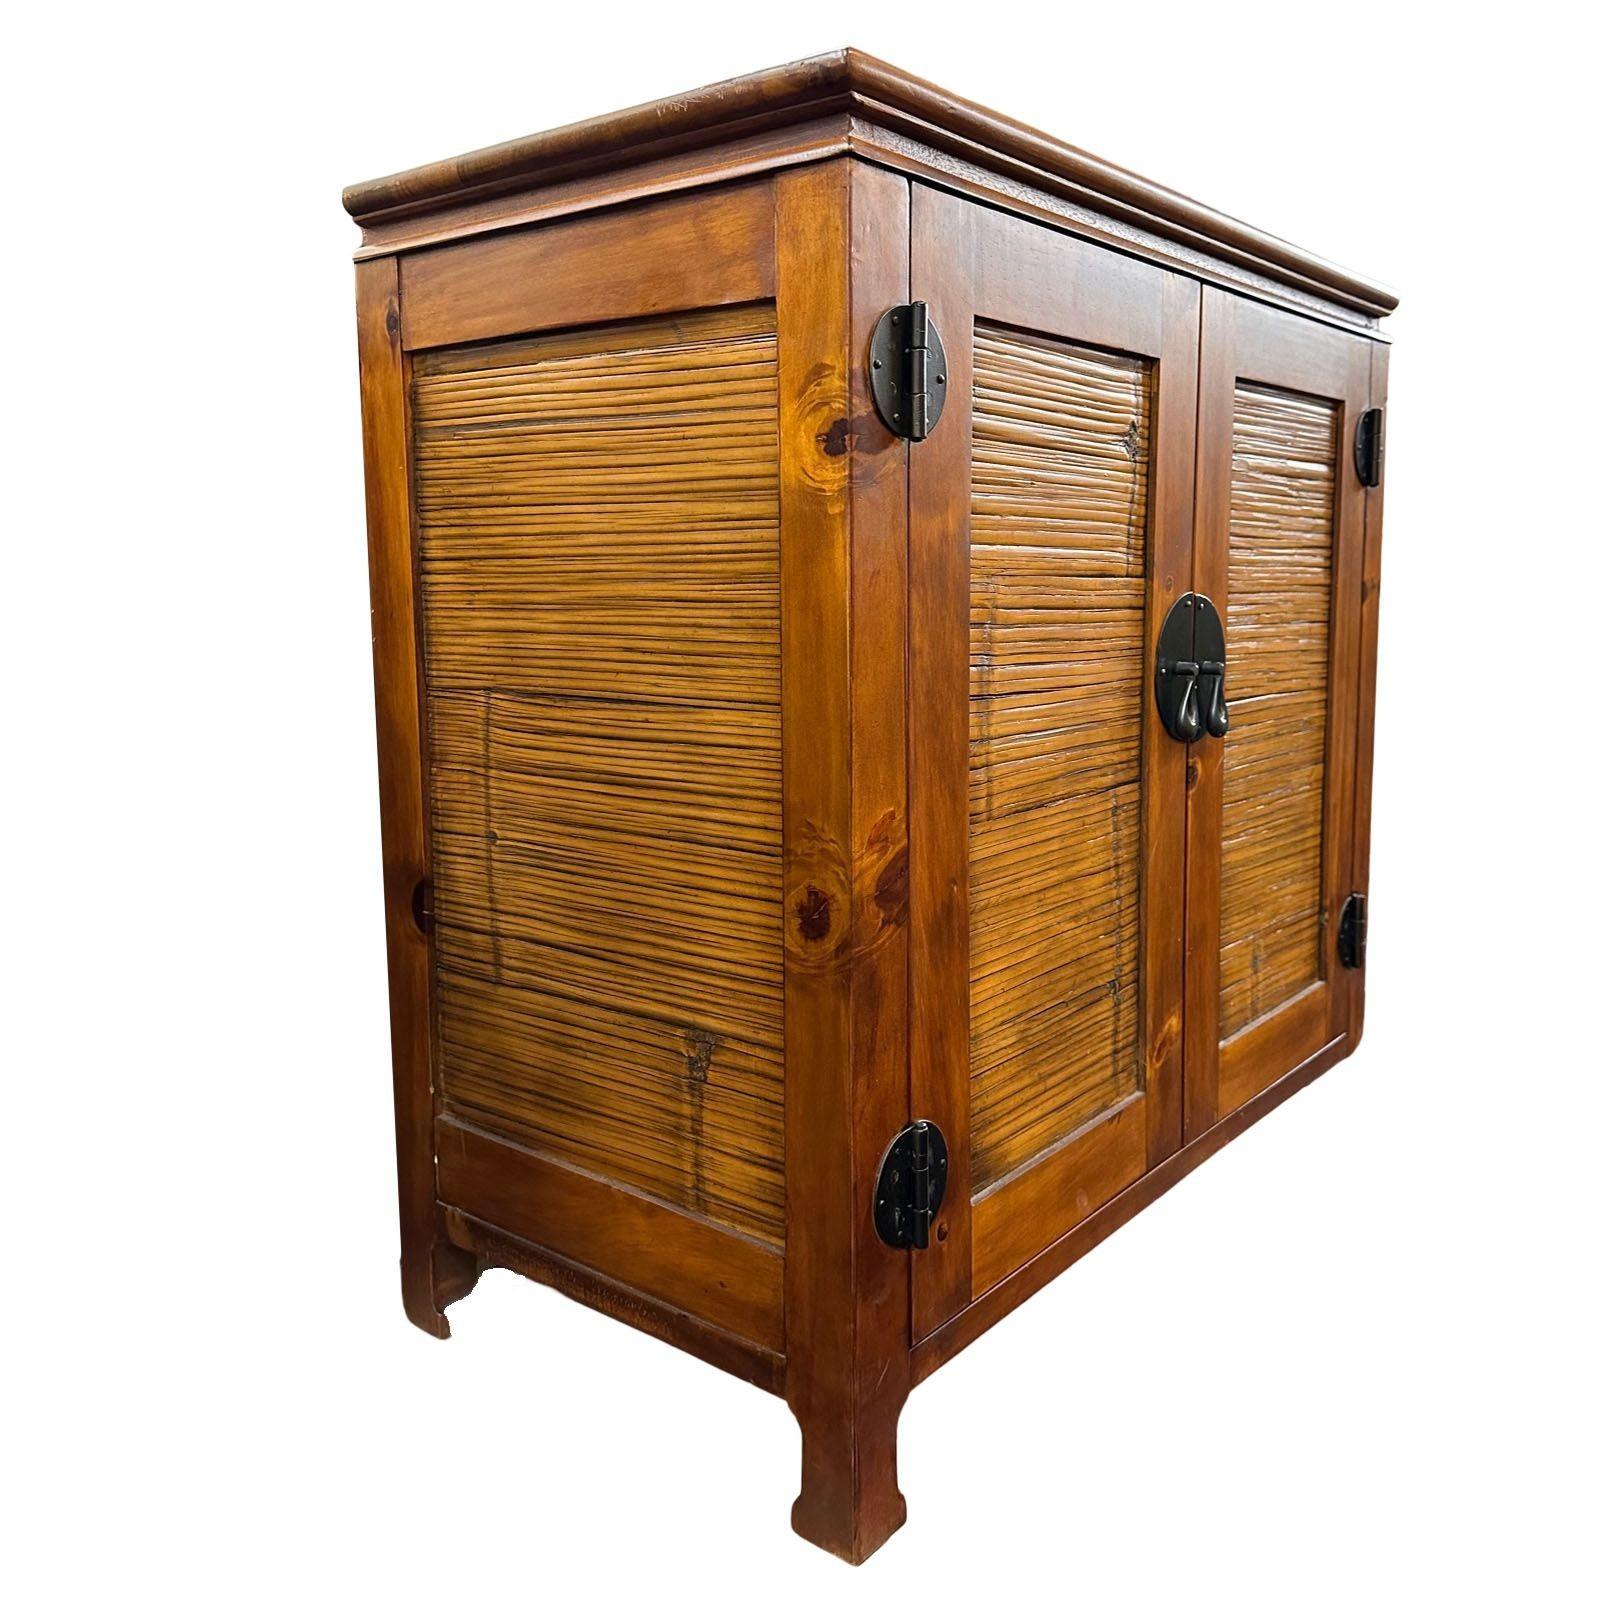 The oriental style reminiscent of designer James Mont with Koa wood and rattan cabinet seamlessly fuse traditional craftsmanship with contemporary design. Crafted from quality wood and adorned with intricate rattan detailing, it offers ample storage